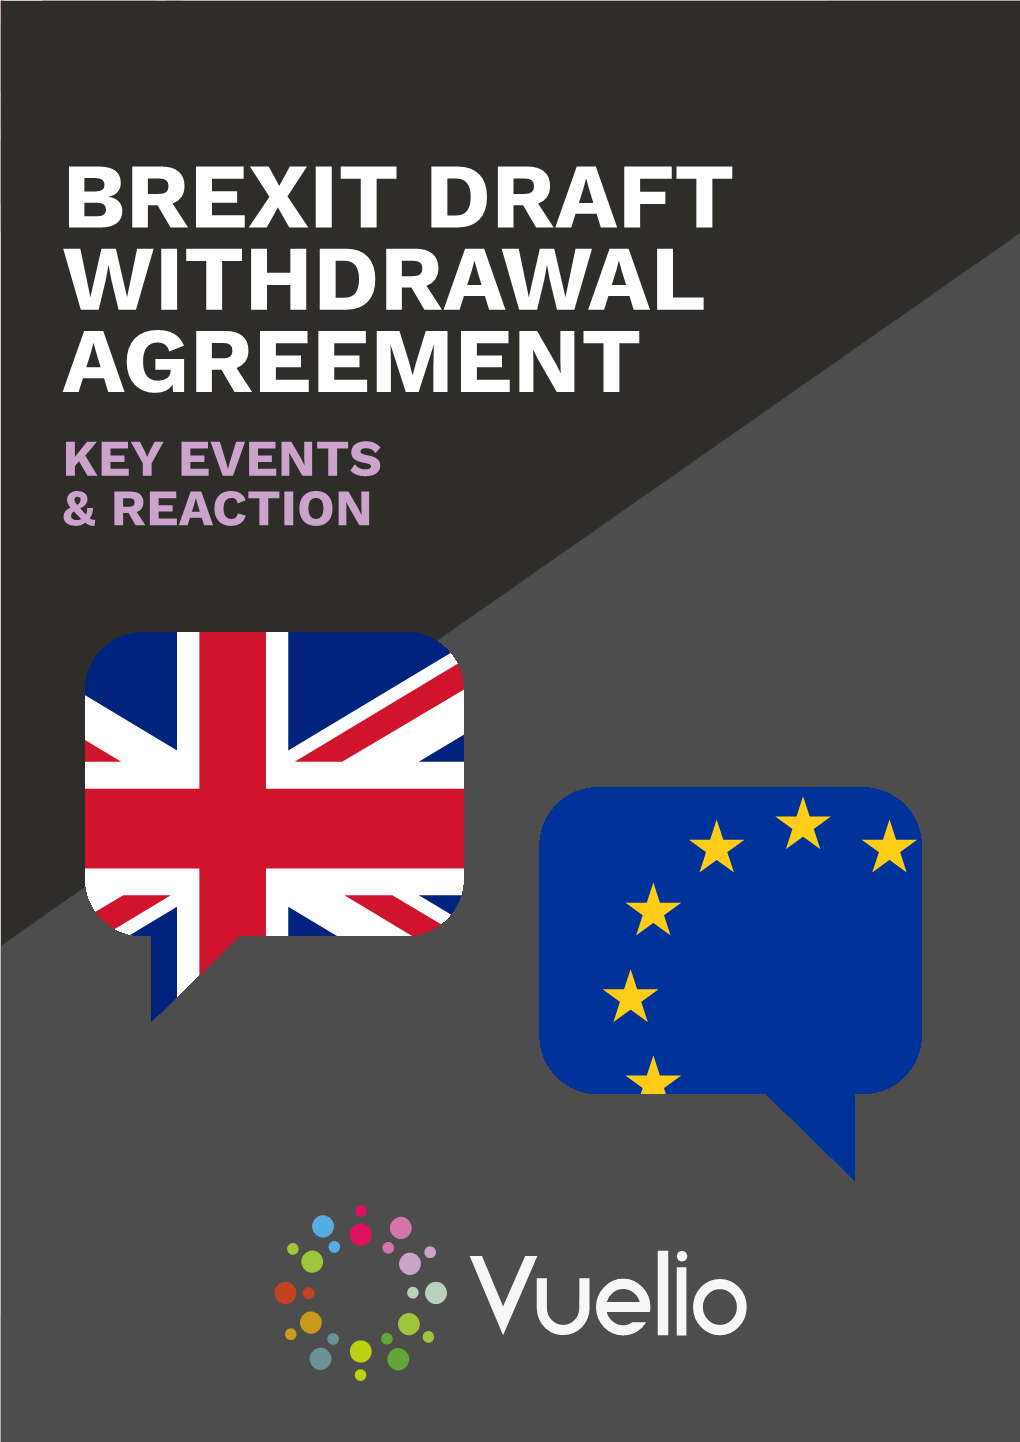 Brexit Draft Withdrawal Agreement Key Events & Reaction